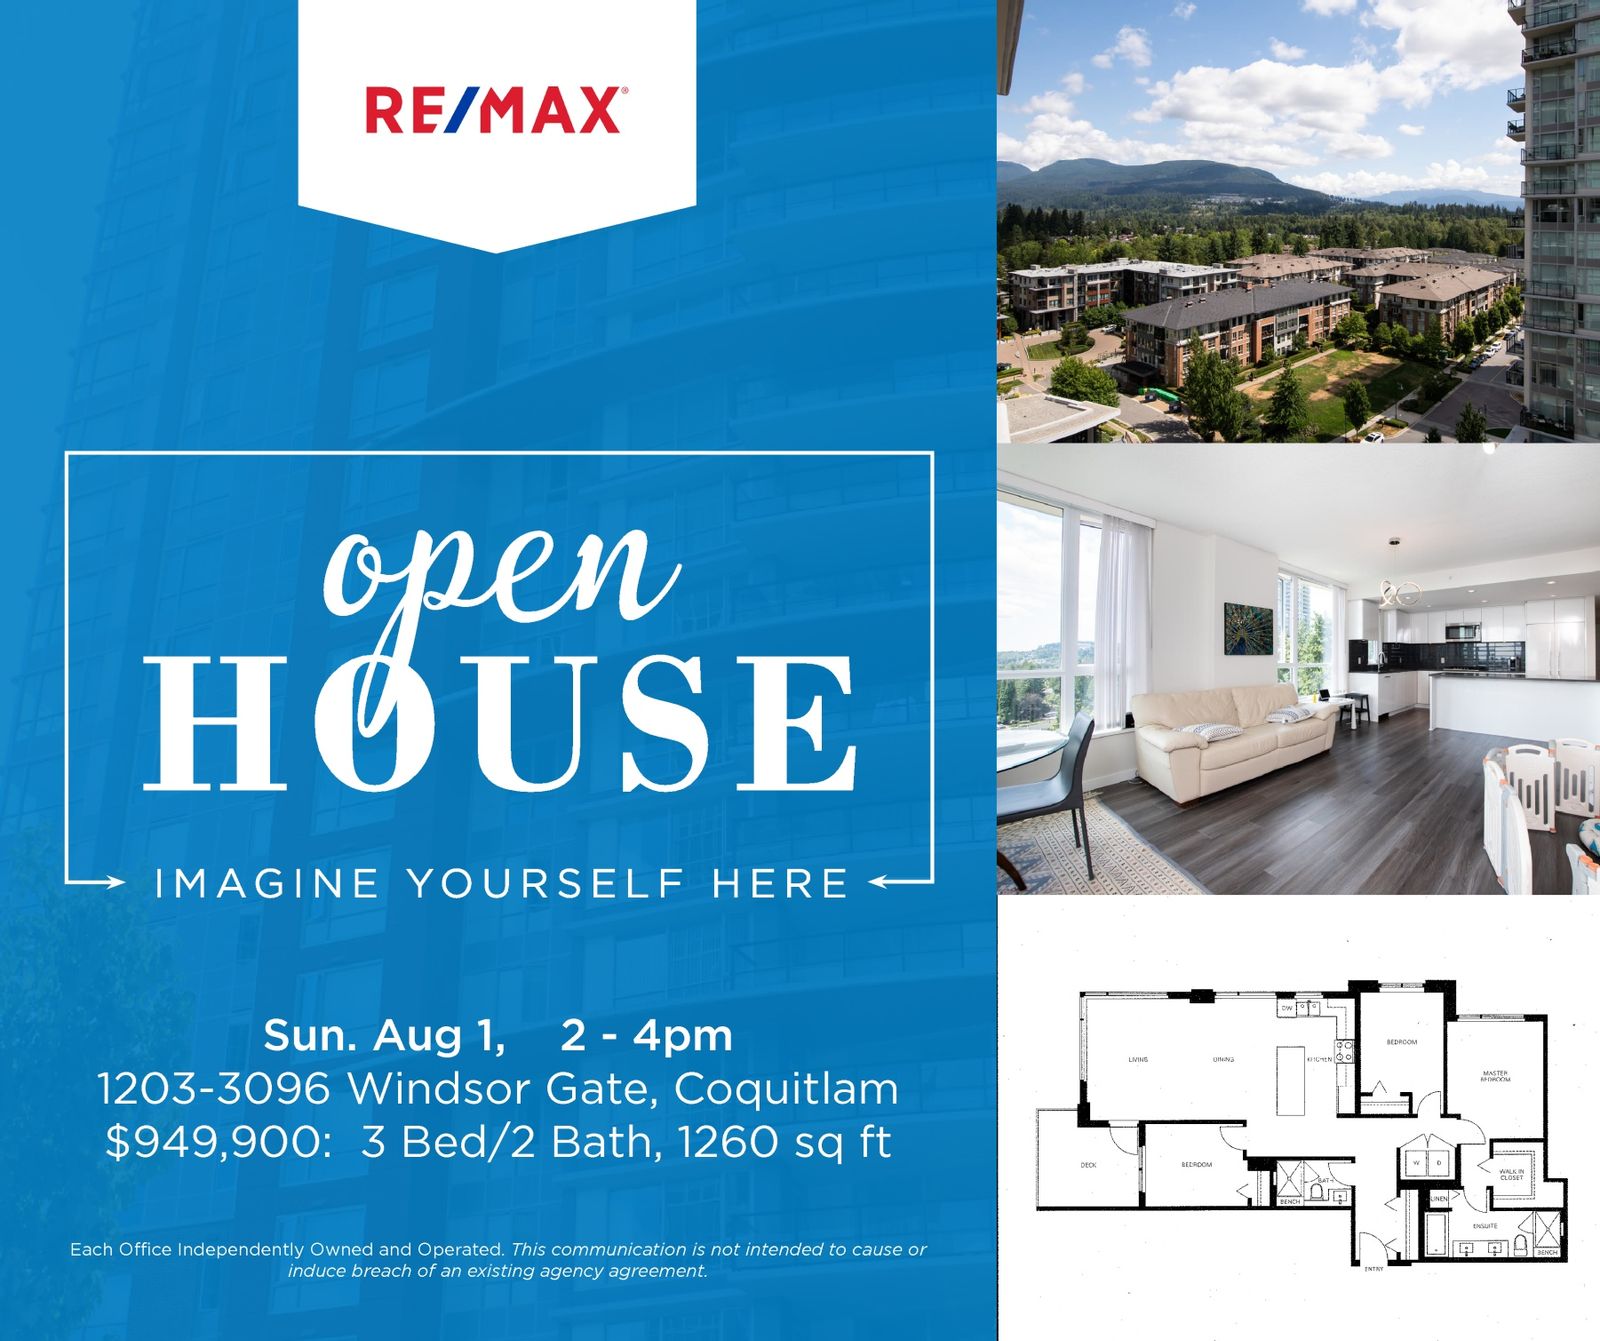 OPEN HOUSE: Aug 1, 2-4pm at 1203-3096 Windsor Gate, Coquitlam